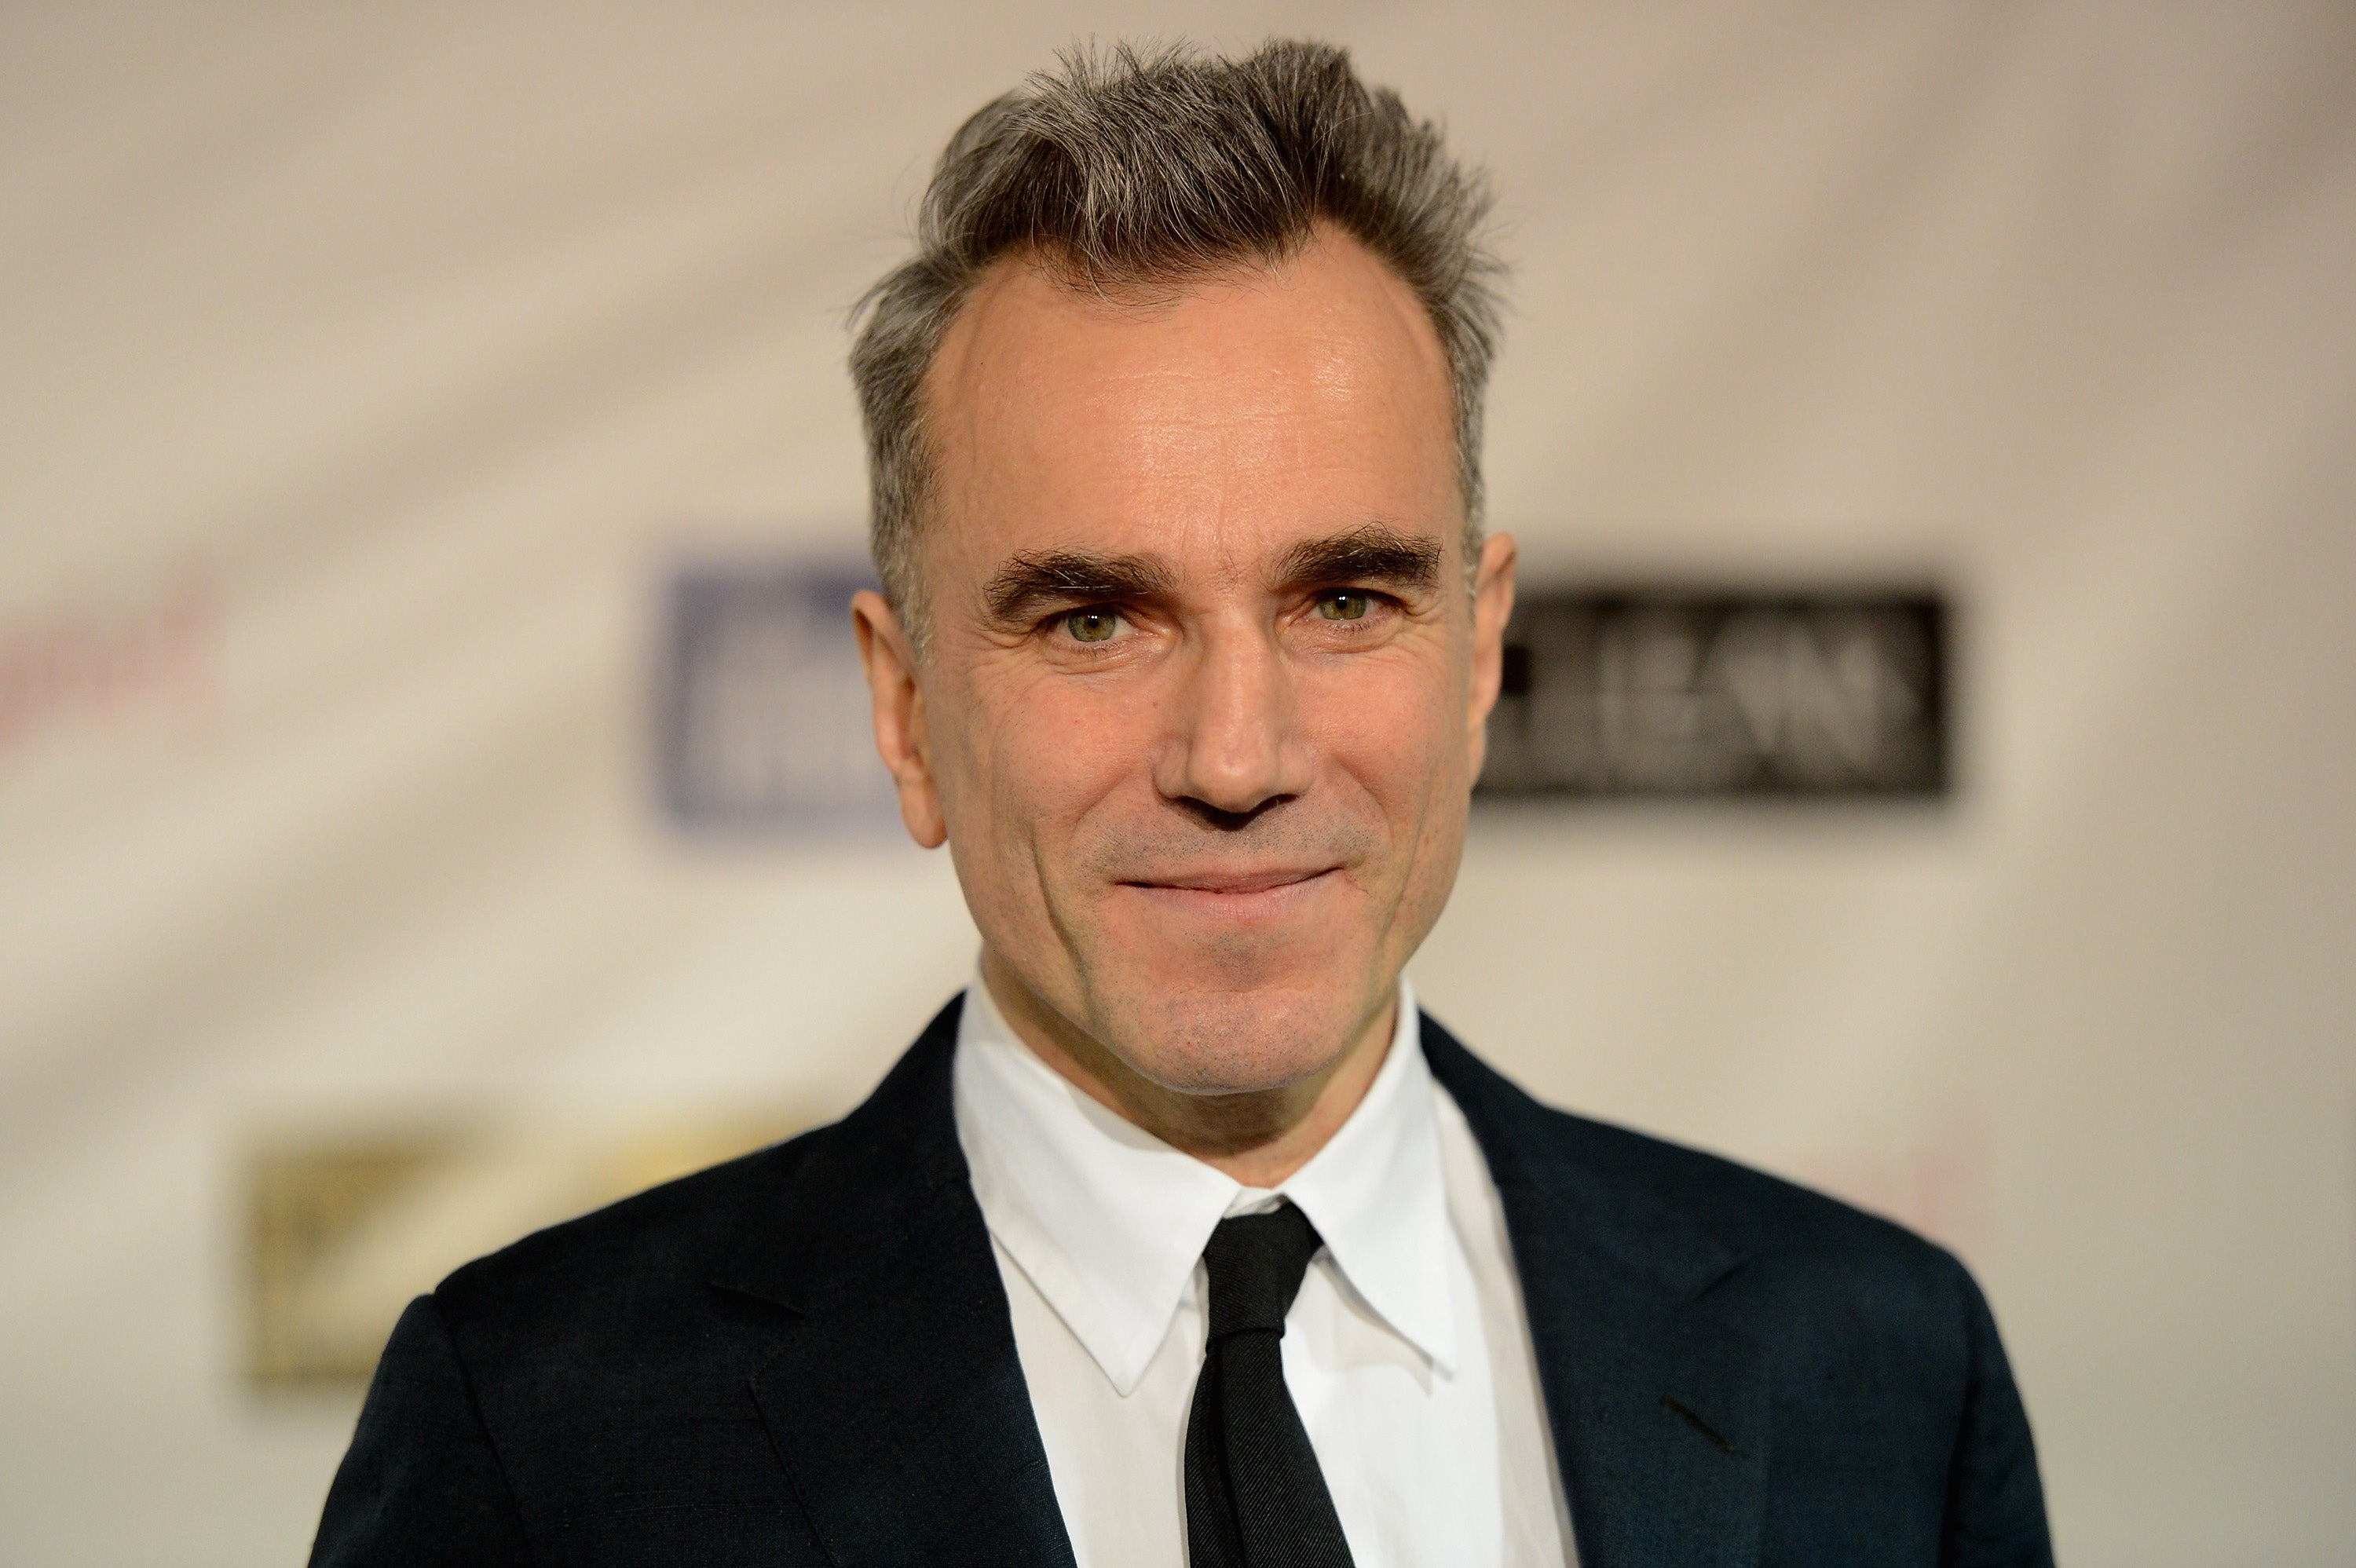 James Bond: Daniel Day-Lewis would make ideal 007, says 'Solo' author ...